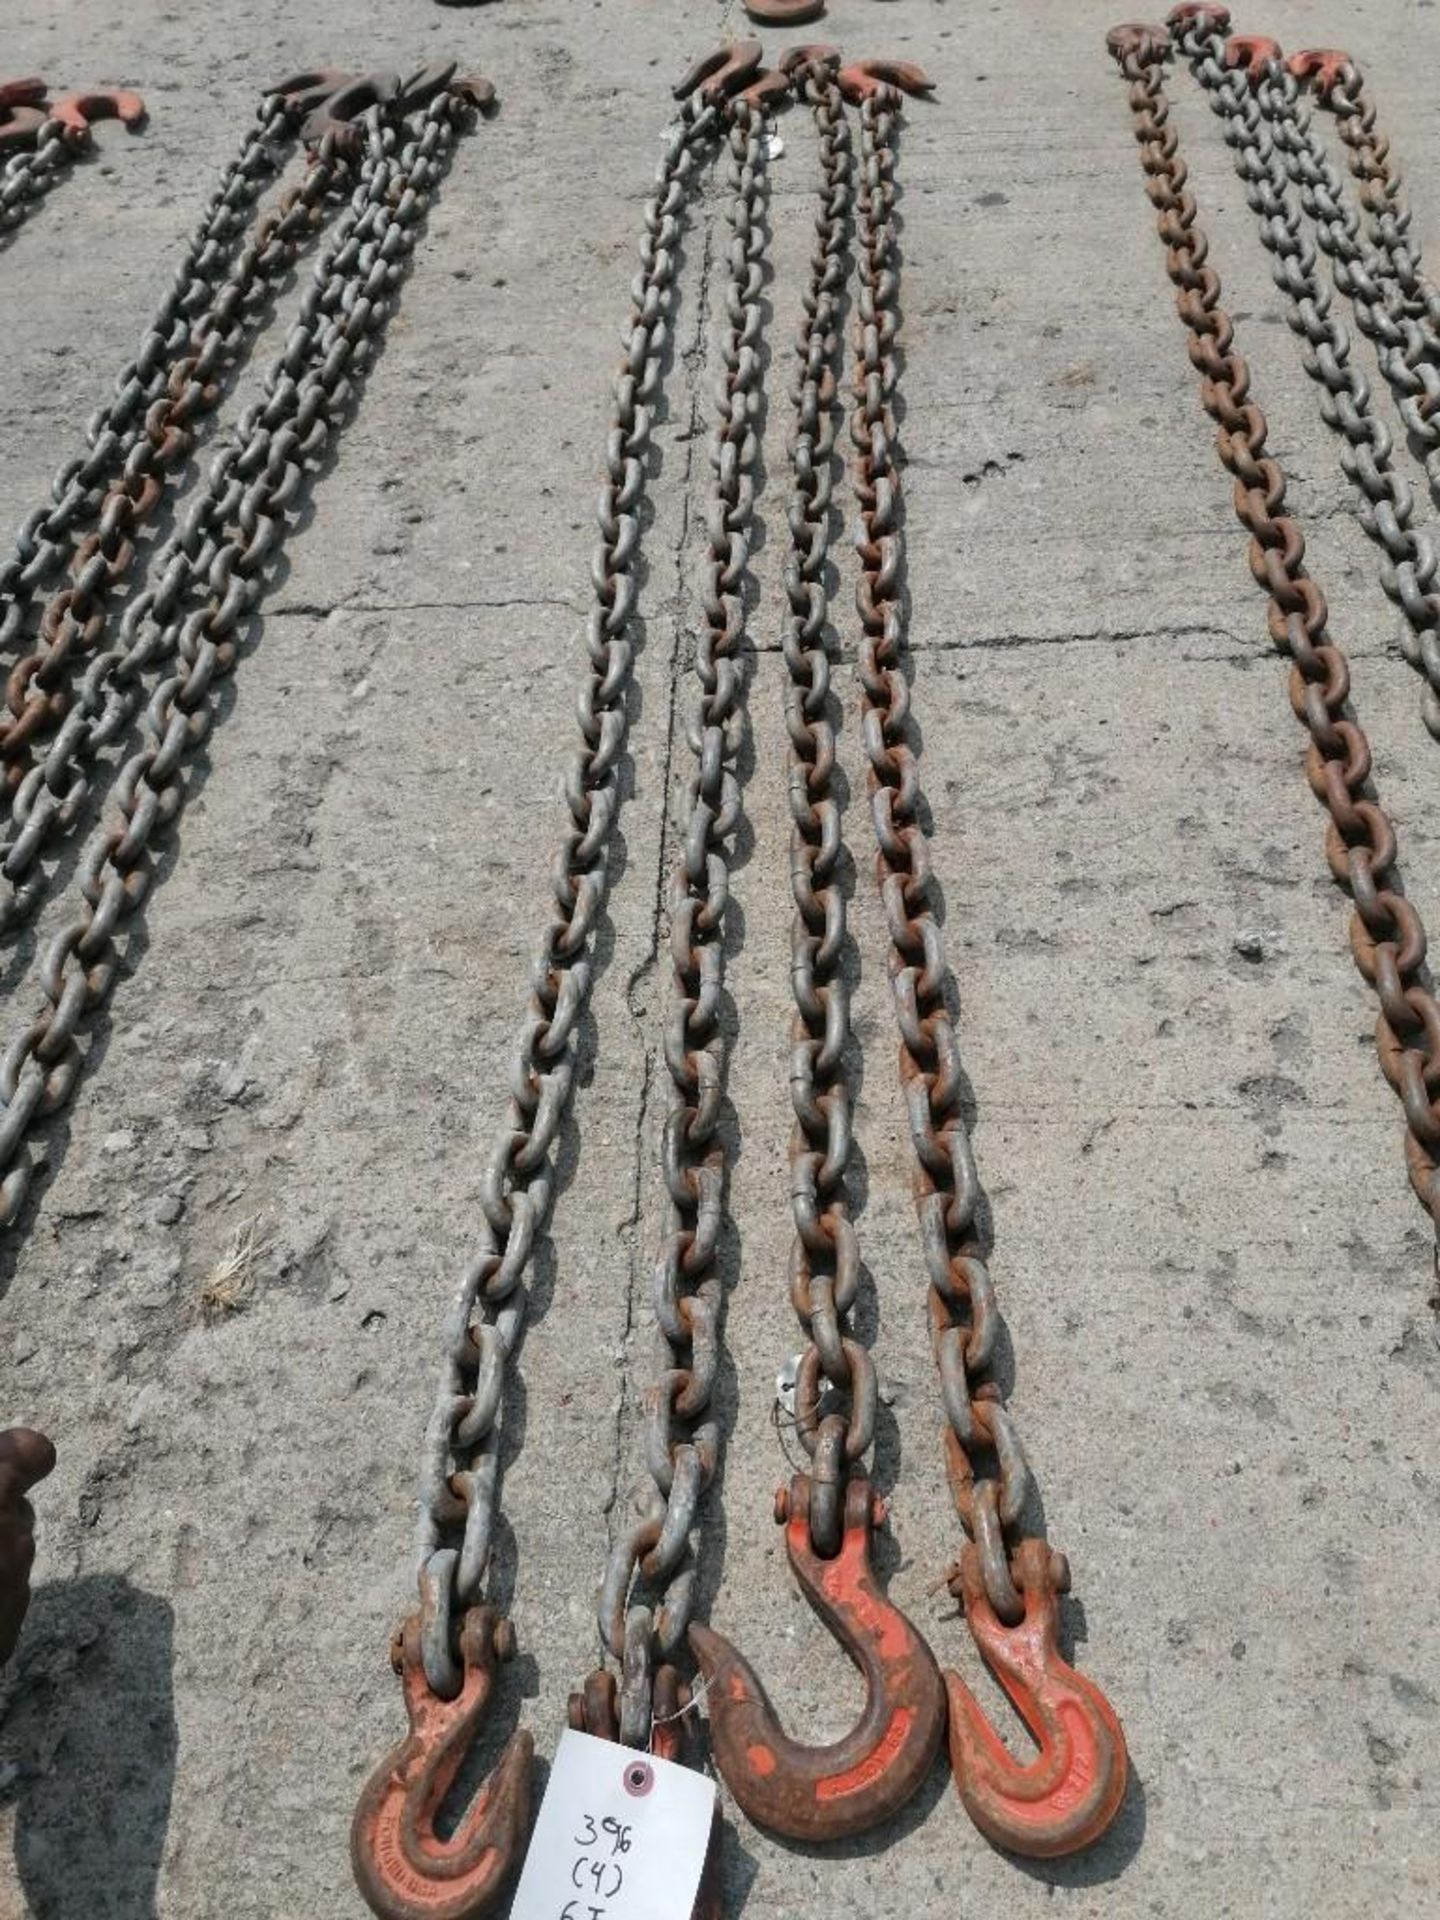 (4) 1/2" USA 6' Chain with hook. Located at 301 E Henry Street, Mt. Pleasant, IA 52641.